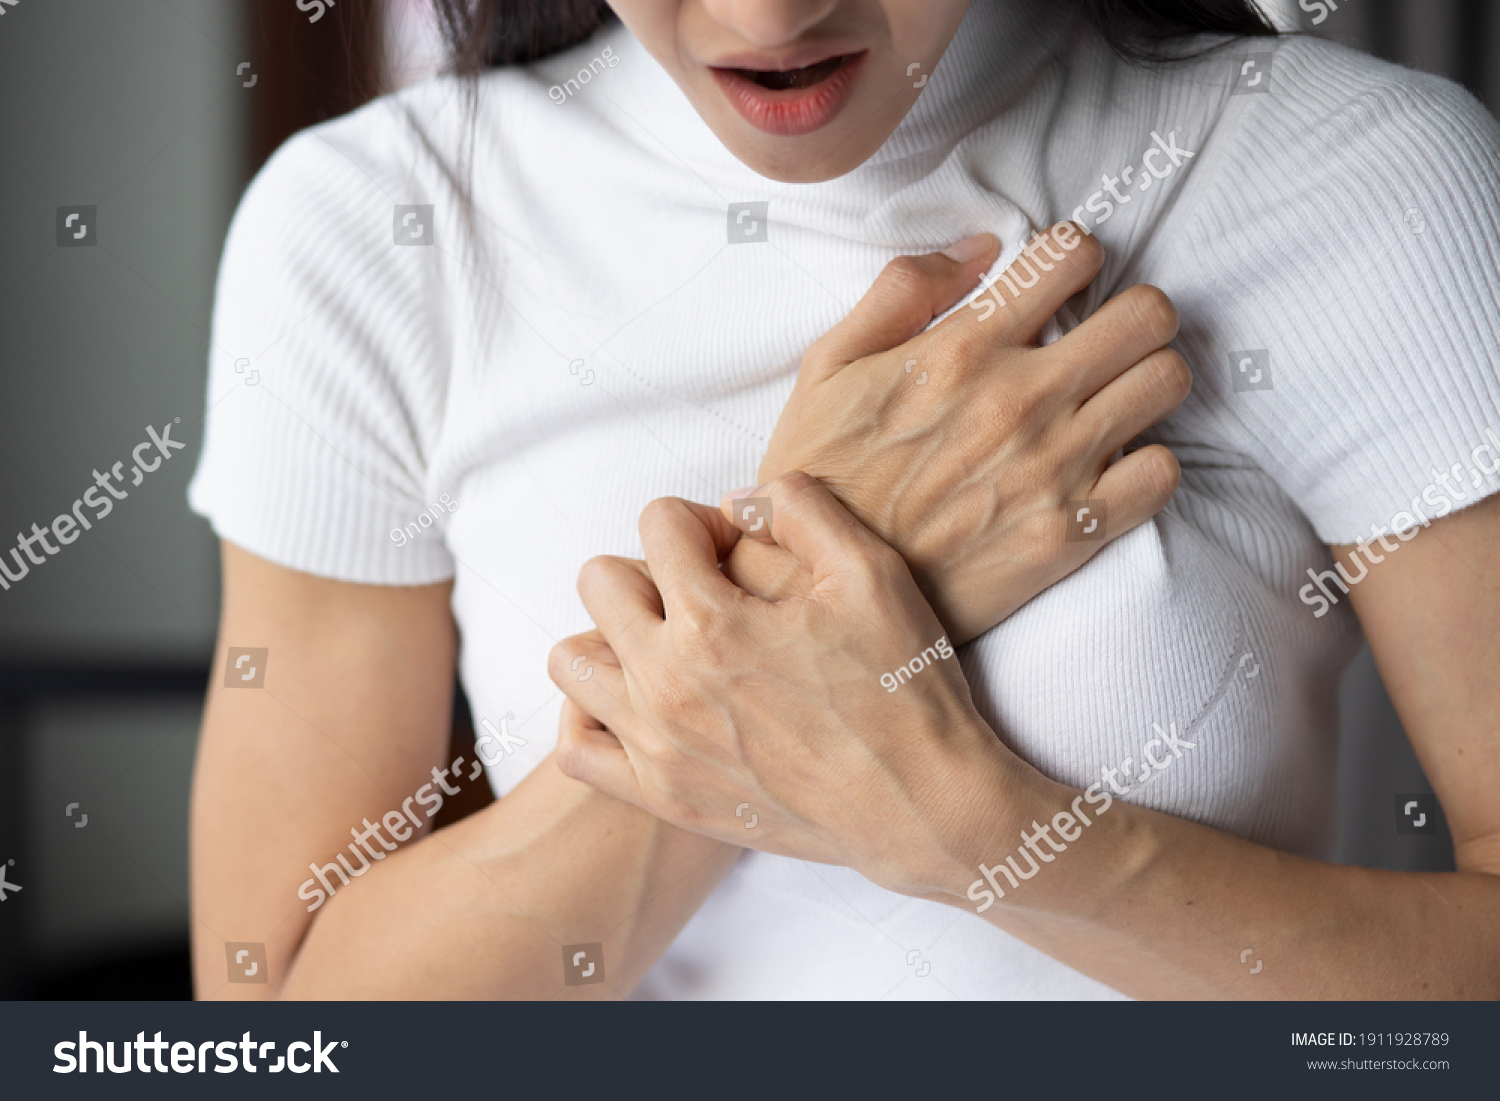 woman with sudden heart attack, sick woman suffering from acute heart attack, concept of emergency health care, asian young adult woman model #1911928789